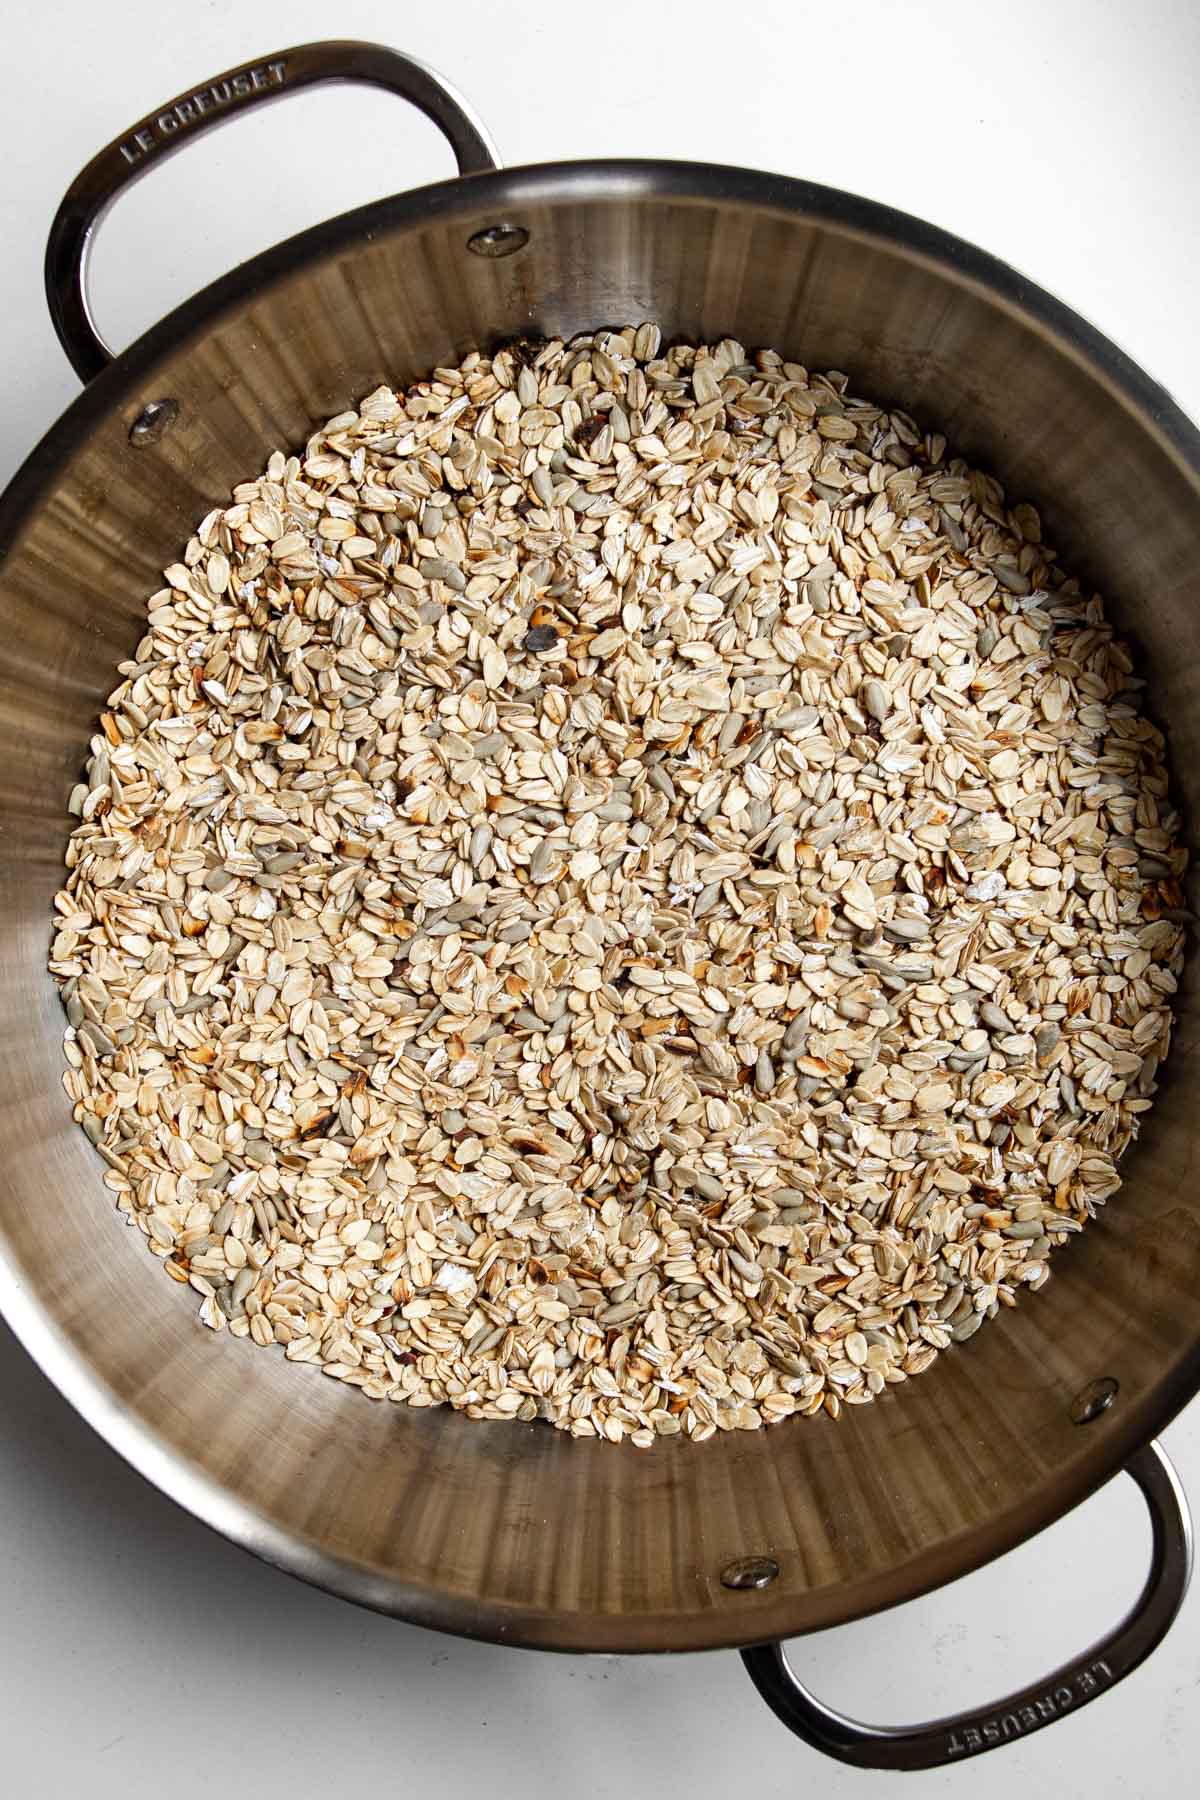 toasted oats and sunflower seeds in a skillet.